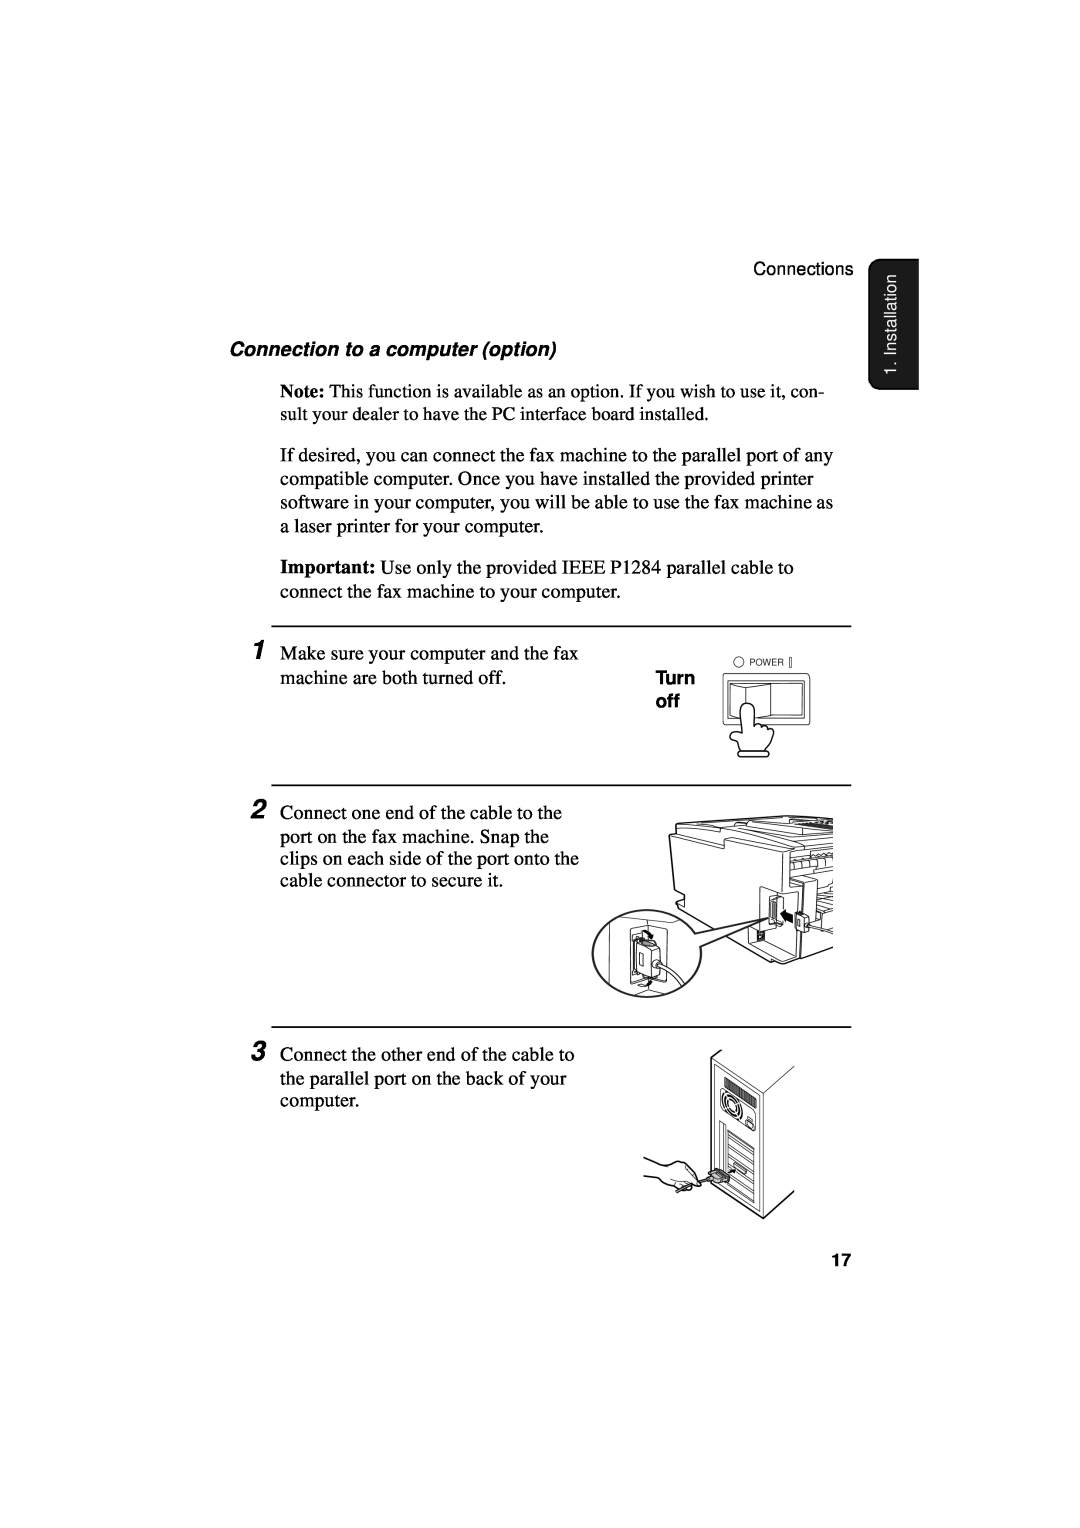 Sharp FO-4700, FO-5700, FO-5550 operation manual Connection to a computer option, Turn 